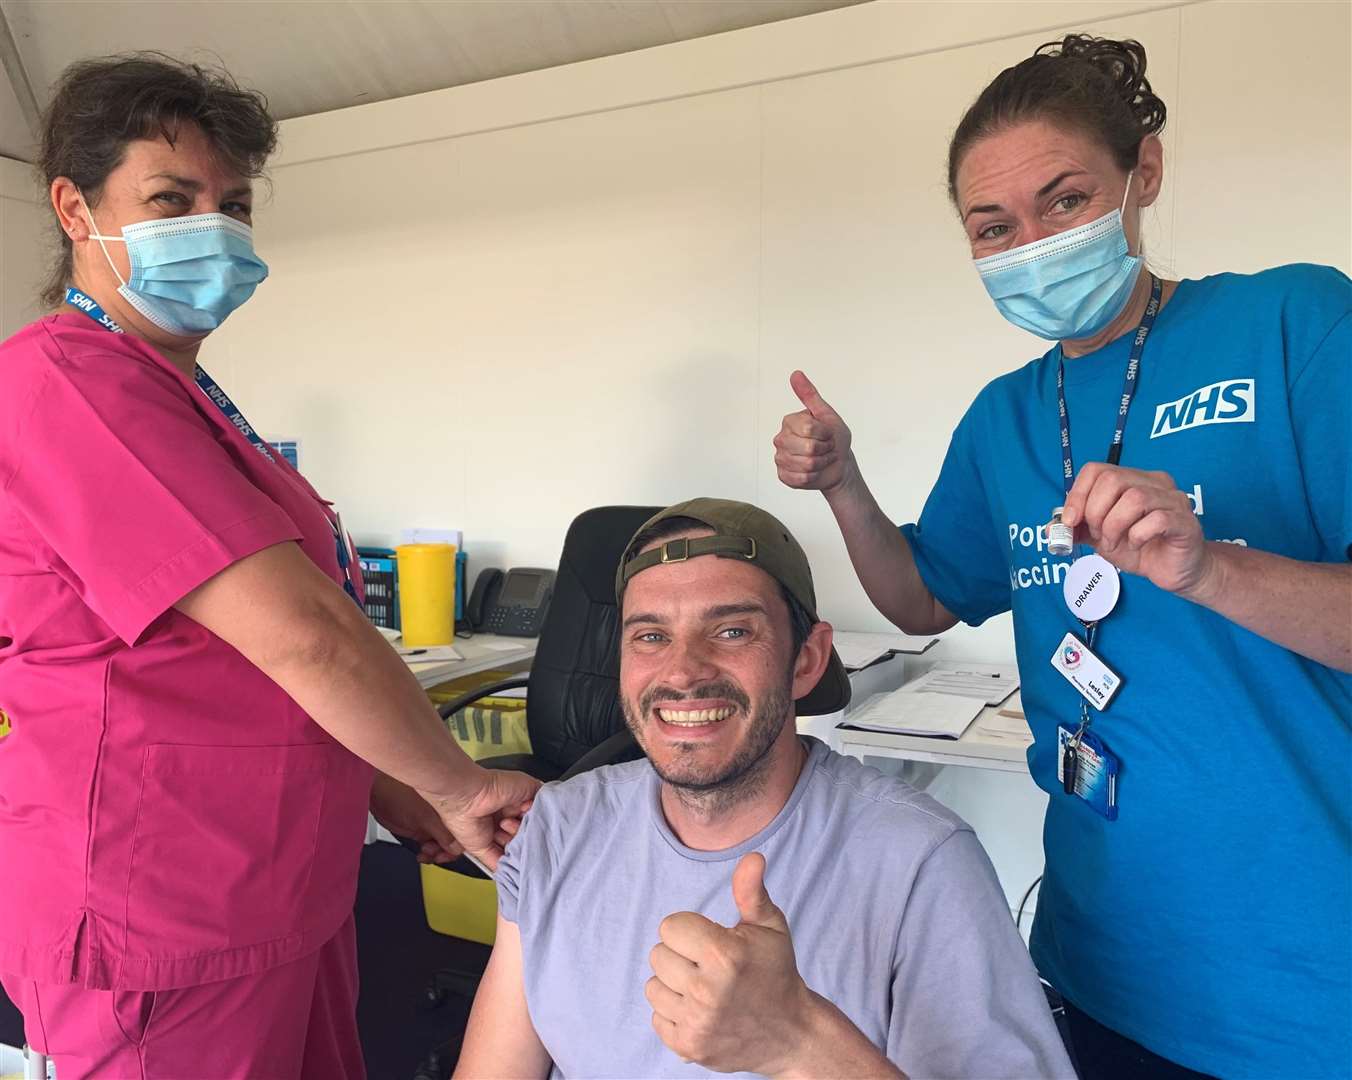 Phil Myers was the 1000th person to get a Covid jab at the pop-up vaccination centre at The Open in Sandwich on Sunday